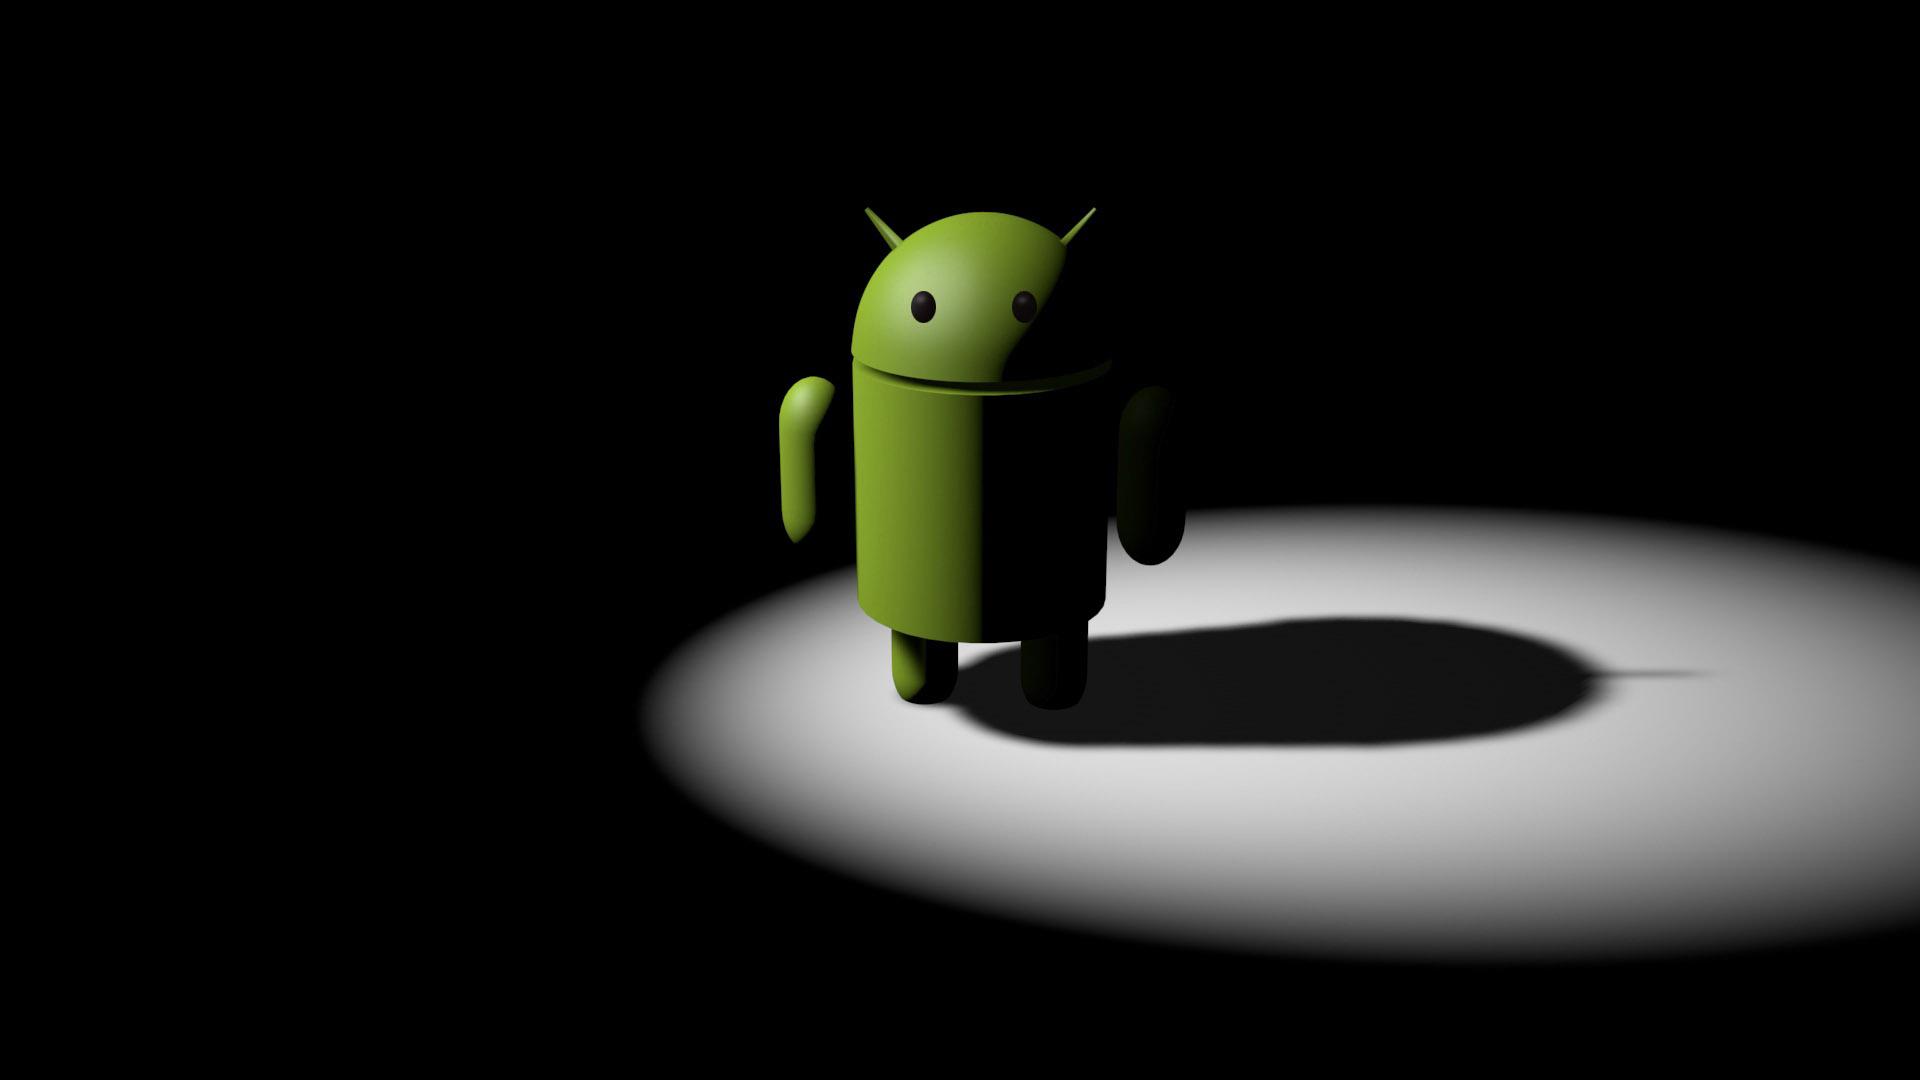 Android Alone Robot 1080p Wallpaper - Android Icon Wallpaper Hd - HD Wallpaper 